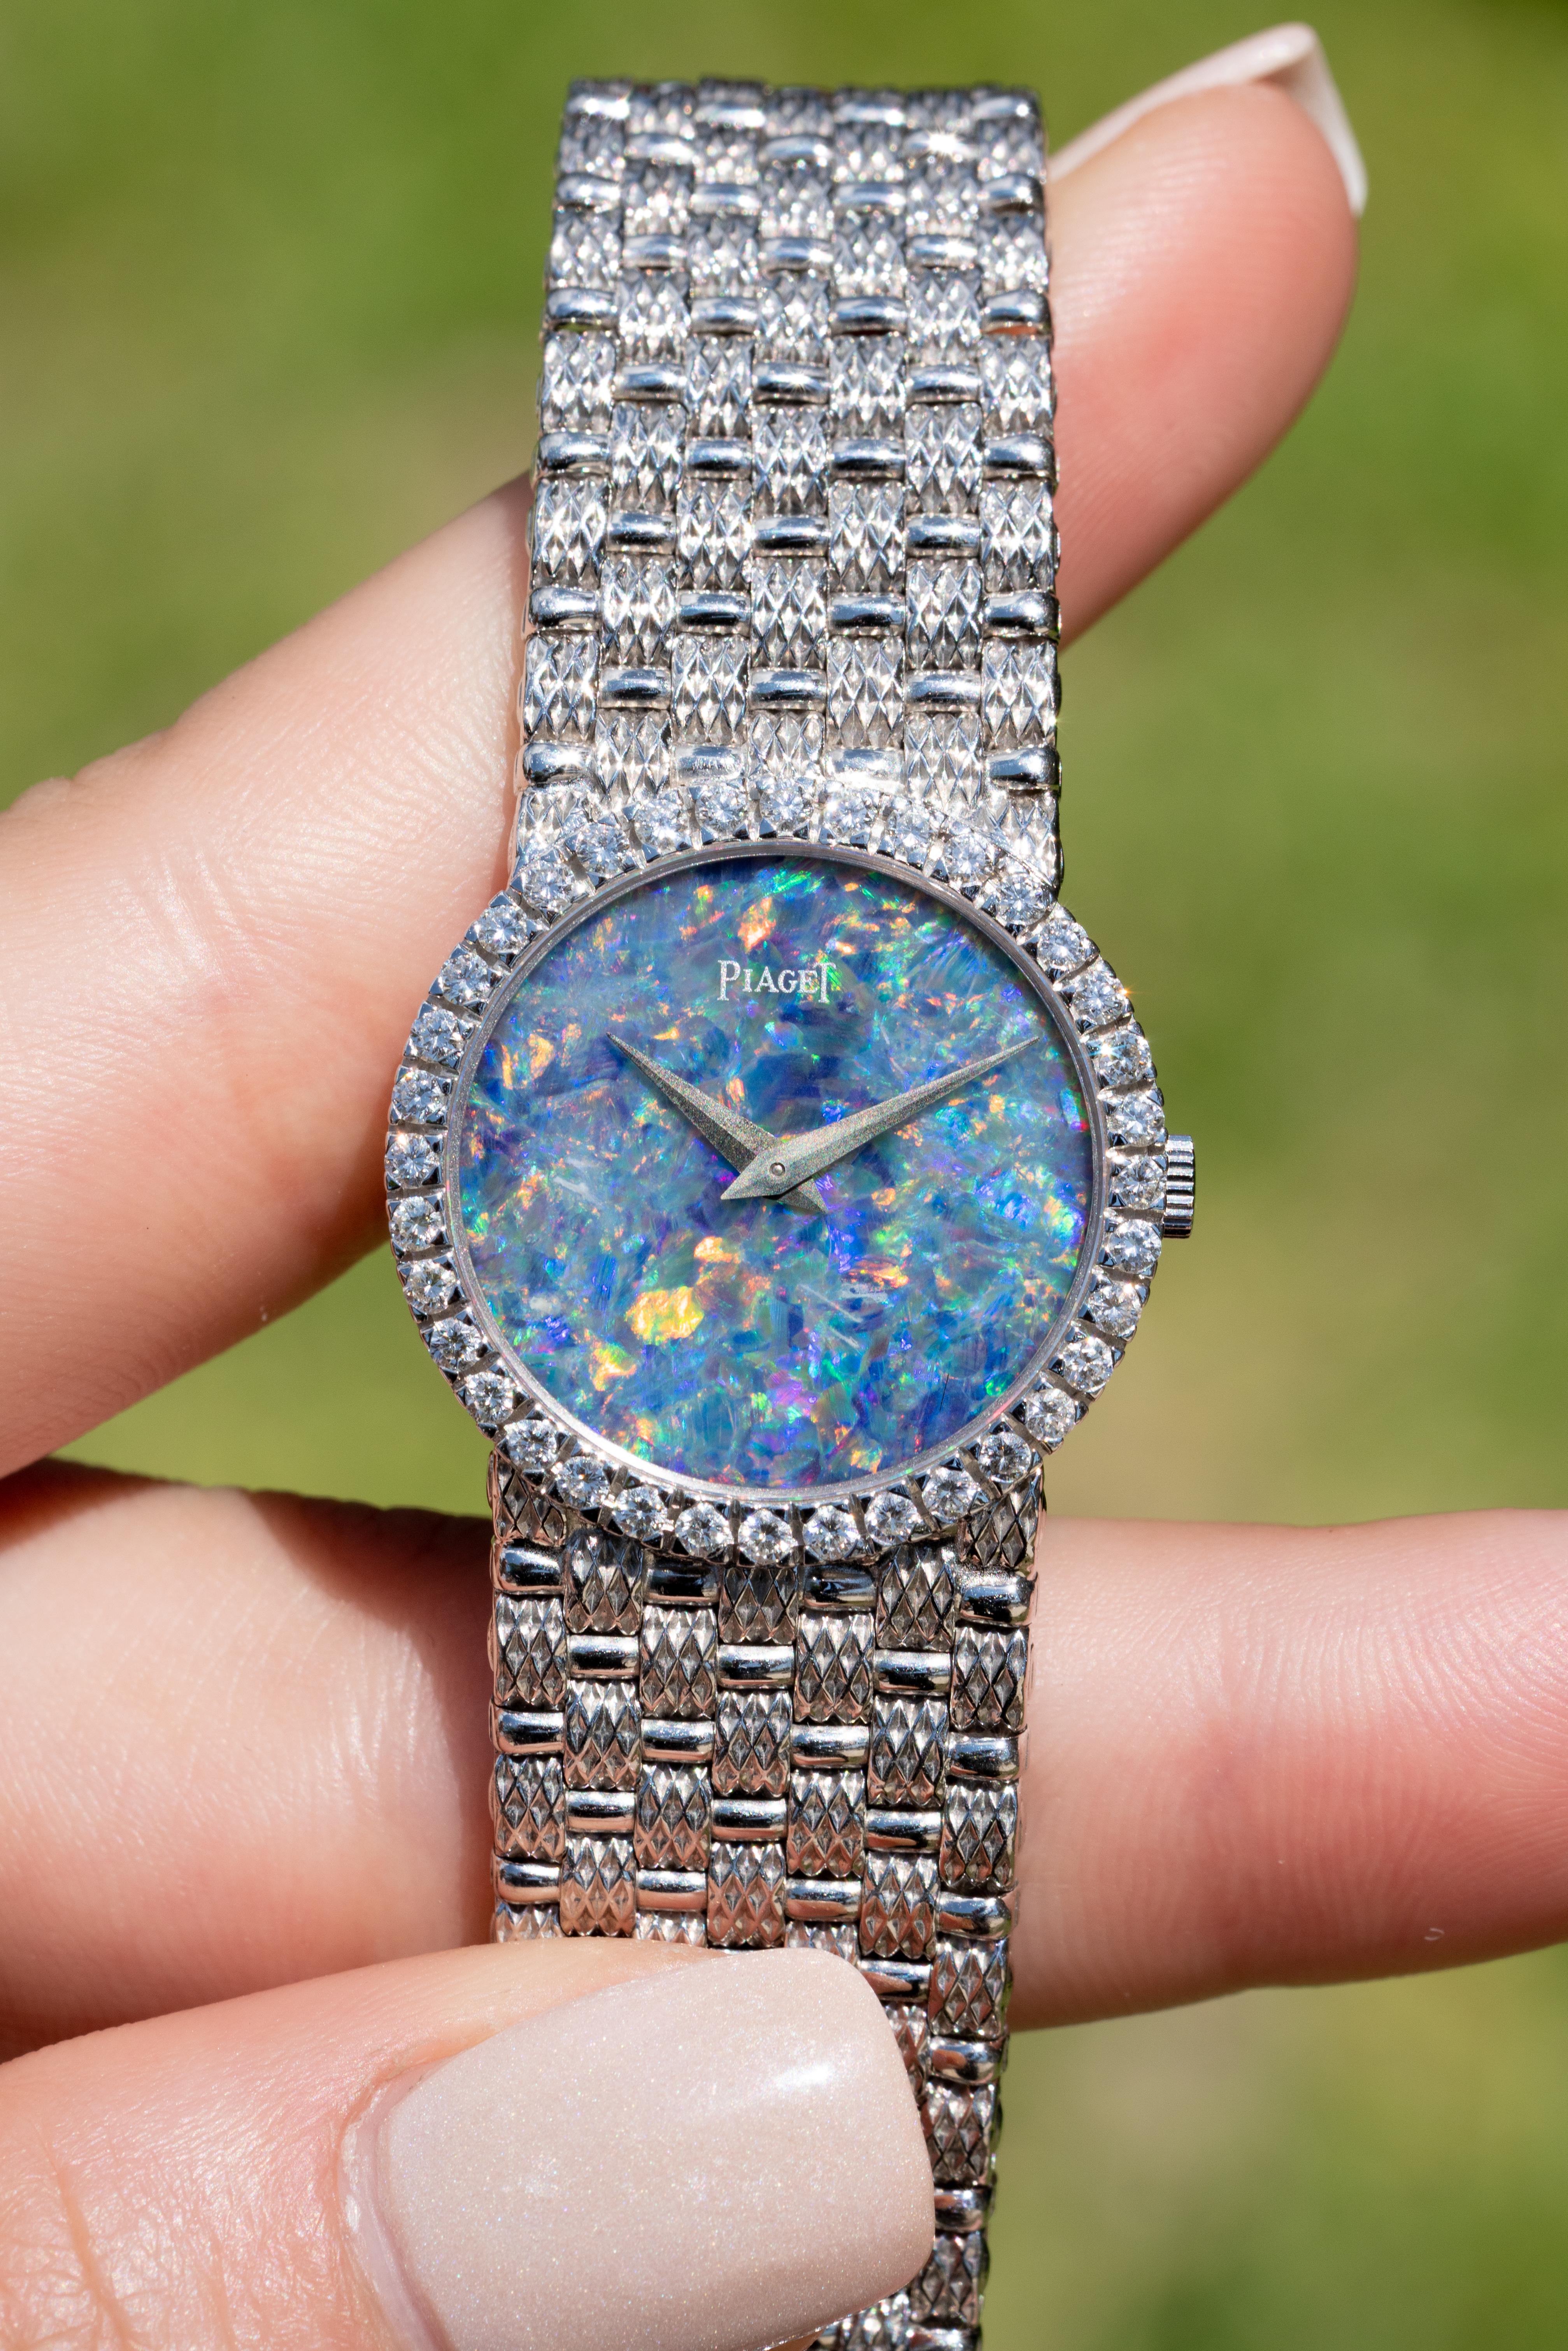 Piaget 9706D23 18k White Gold Opal Dial Diamond Ladies Watch In Excellent Condition For Sale In Boca Raton, FL